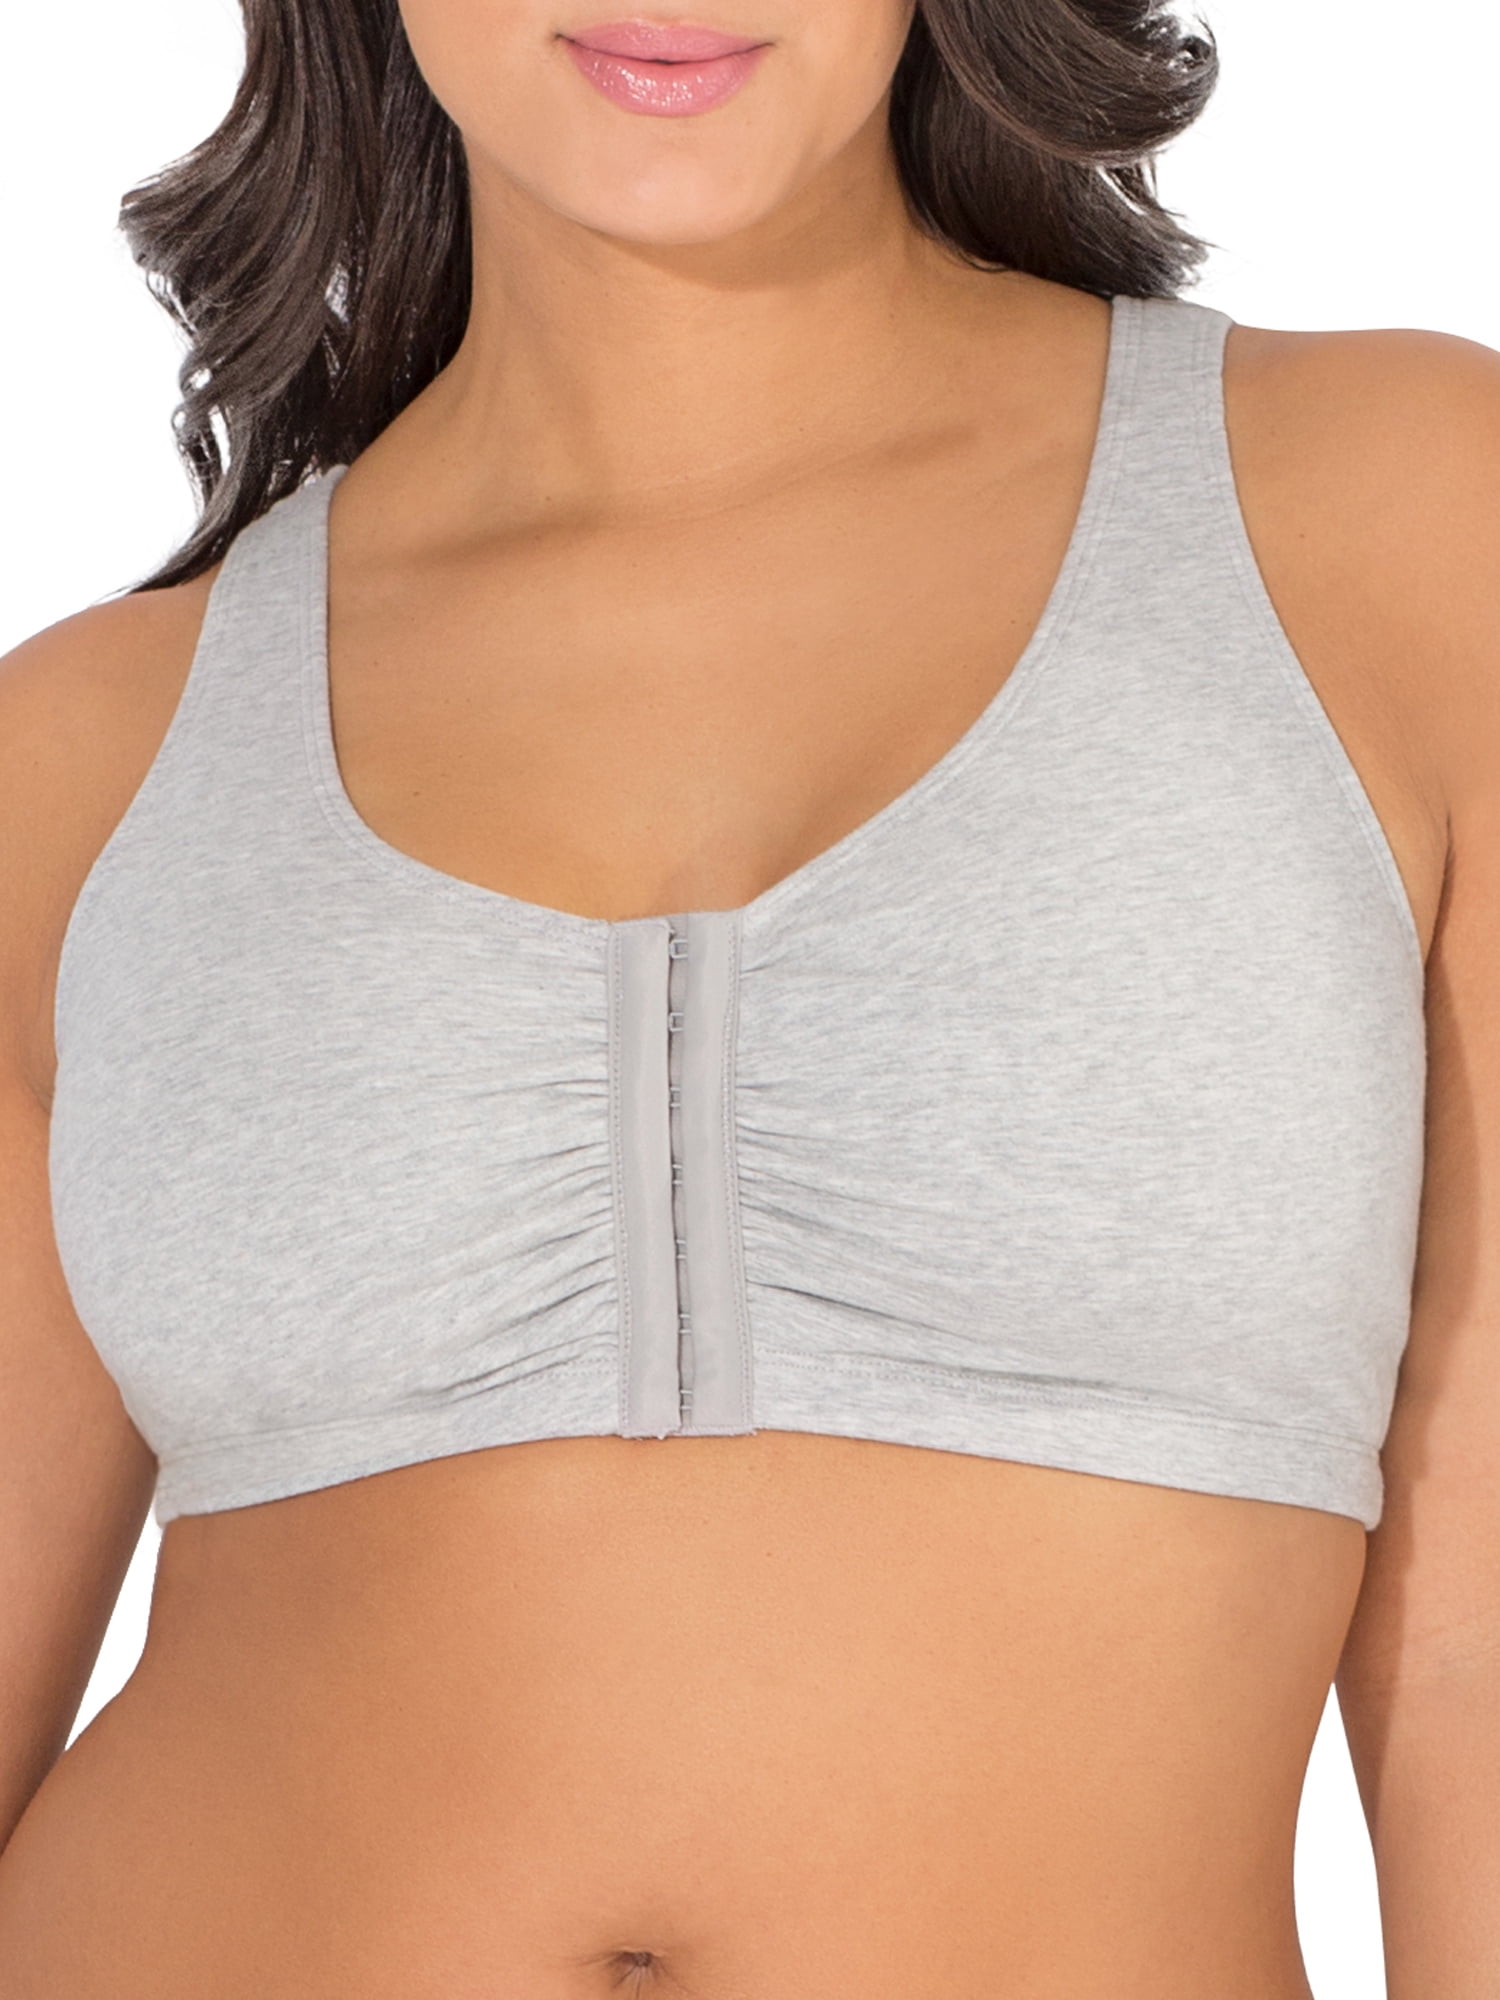 Fruit of The Loom Women's Comfort Front Close Cotton Sports Bra